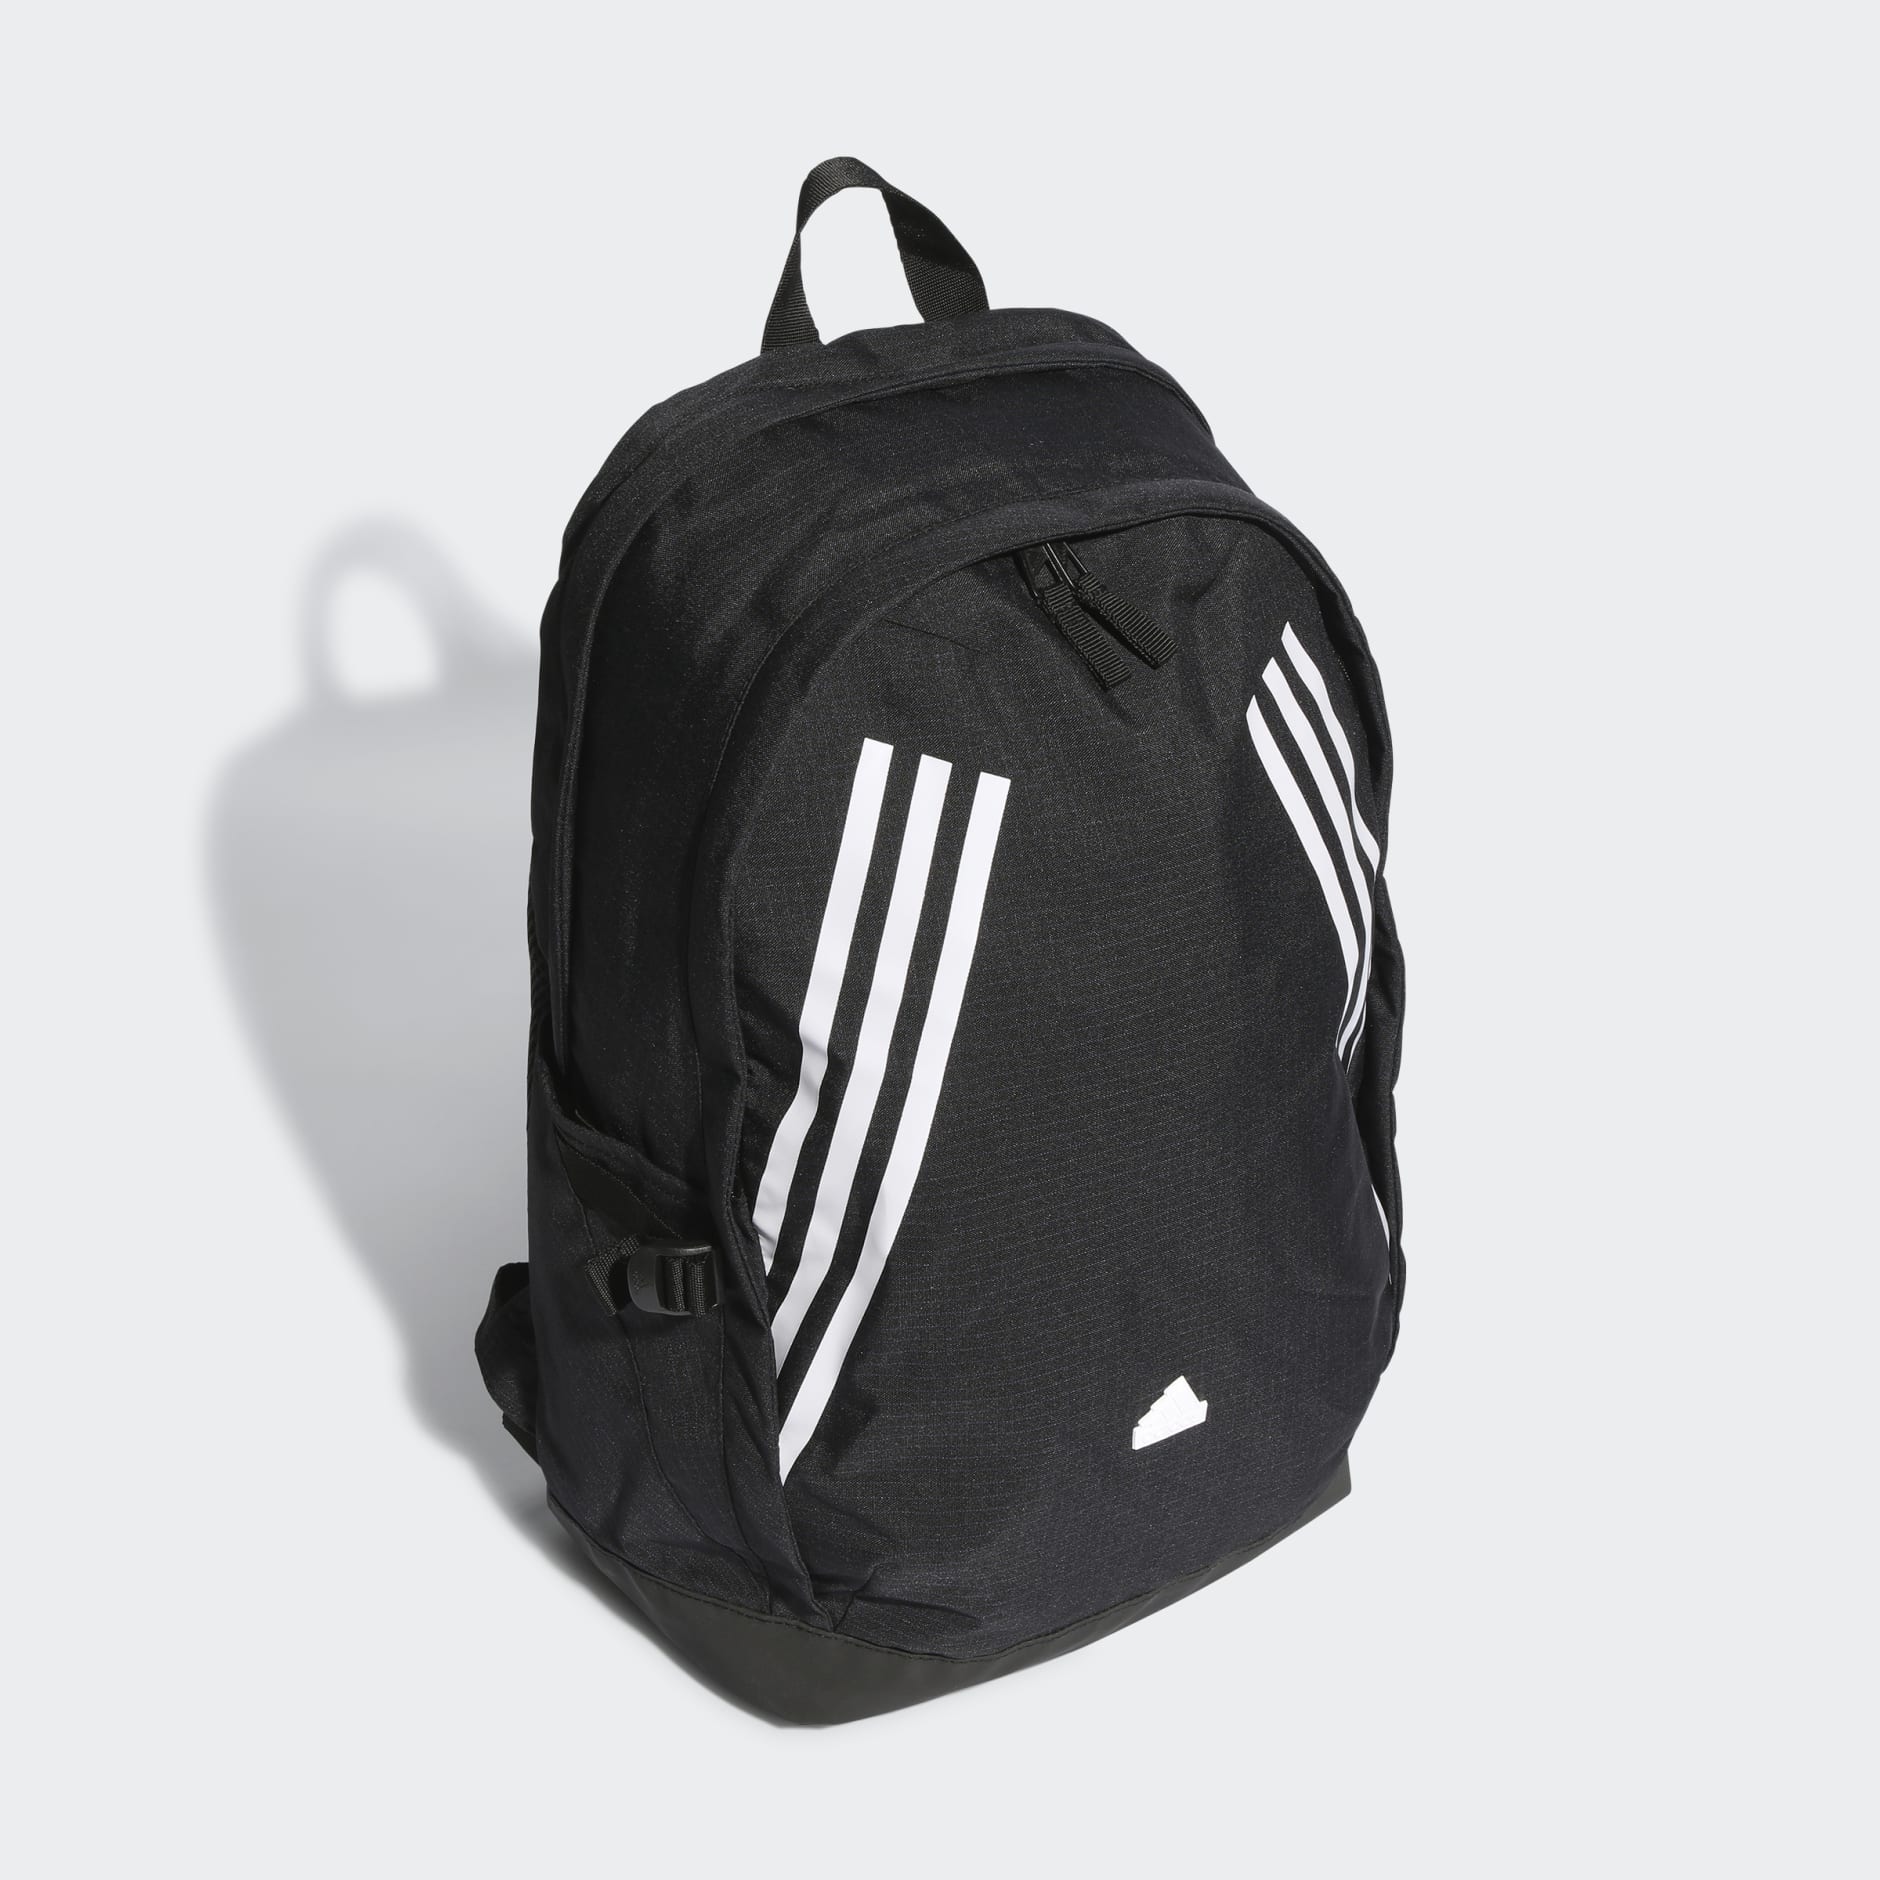 adidas Youth Classic 3S Backpack, Black/White Test, One Size, Classic 3s  Backpack : Amazon.sg: Fashion